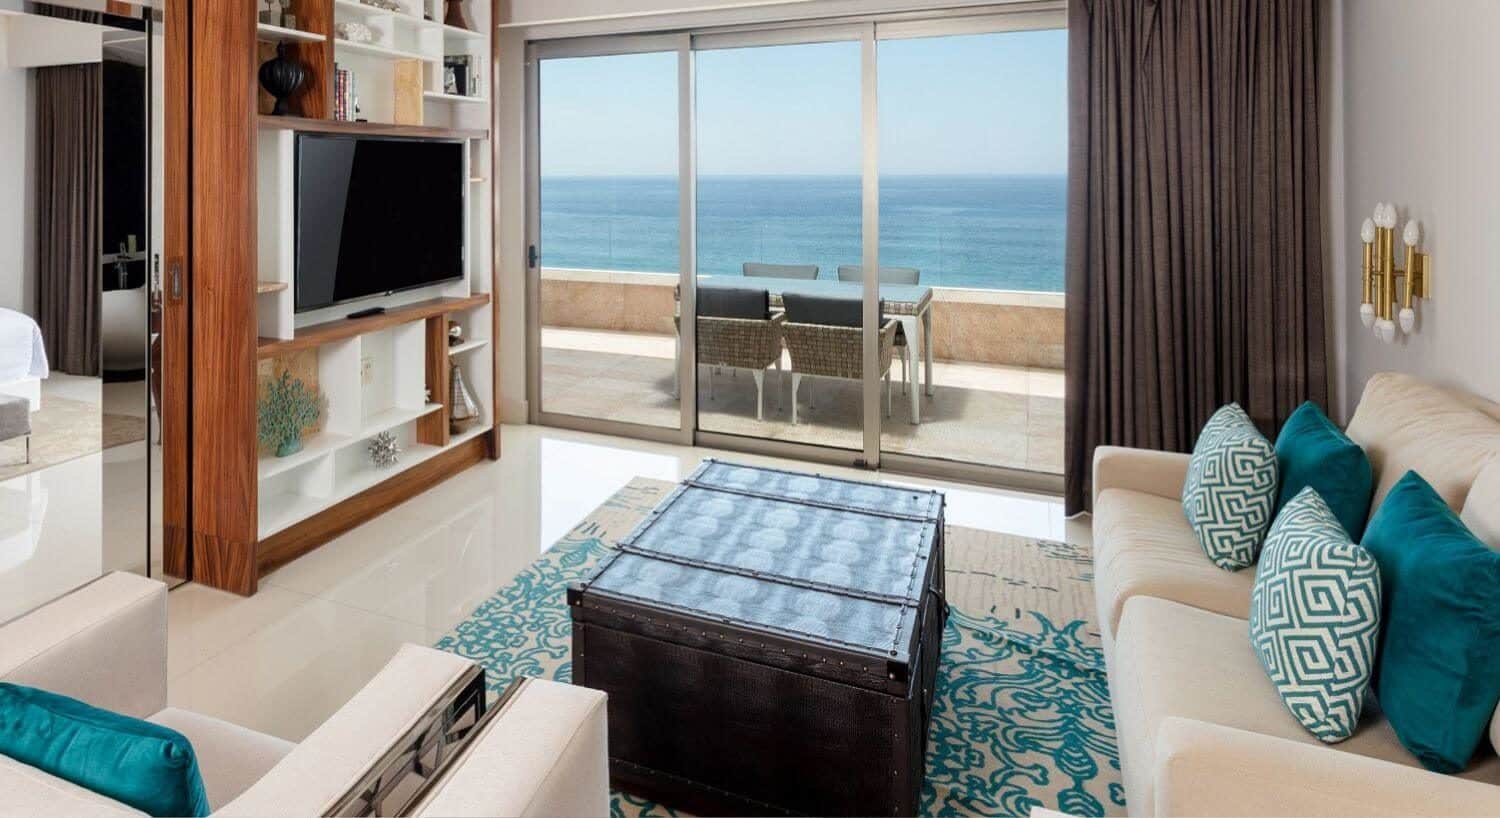 Chic upscale living room with white furniture, a wood chest, an entertainment center with flat screen TV, a bed in the bedroom, and sliding doors in the living room opening to a patio with furniture and ocean views.